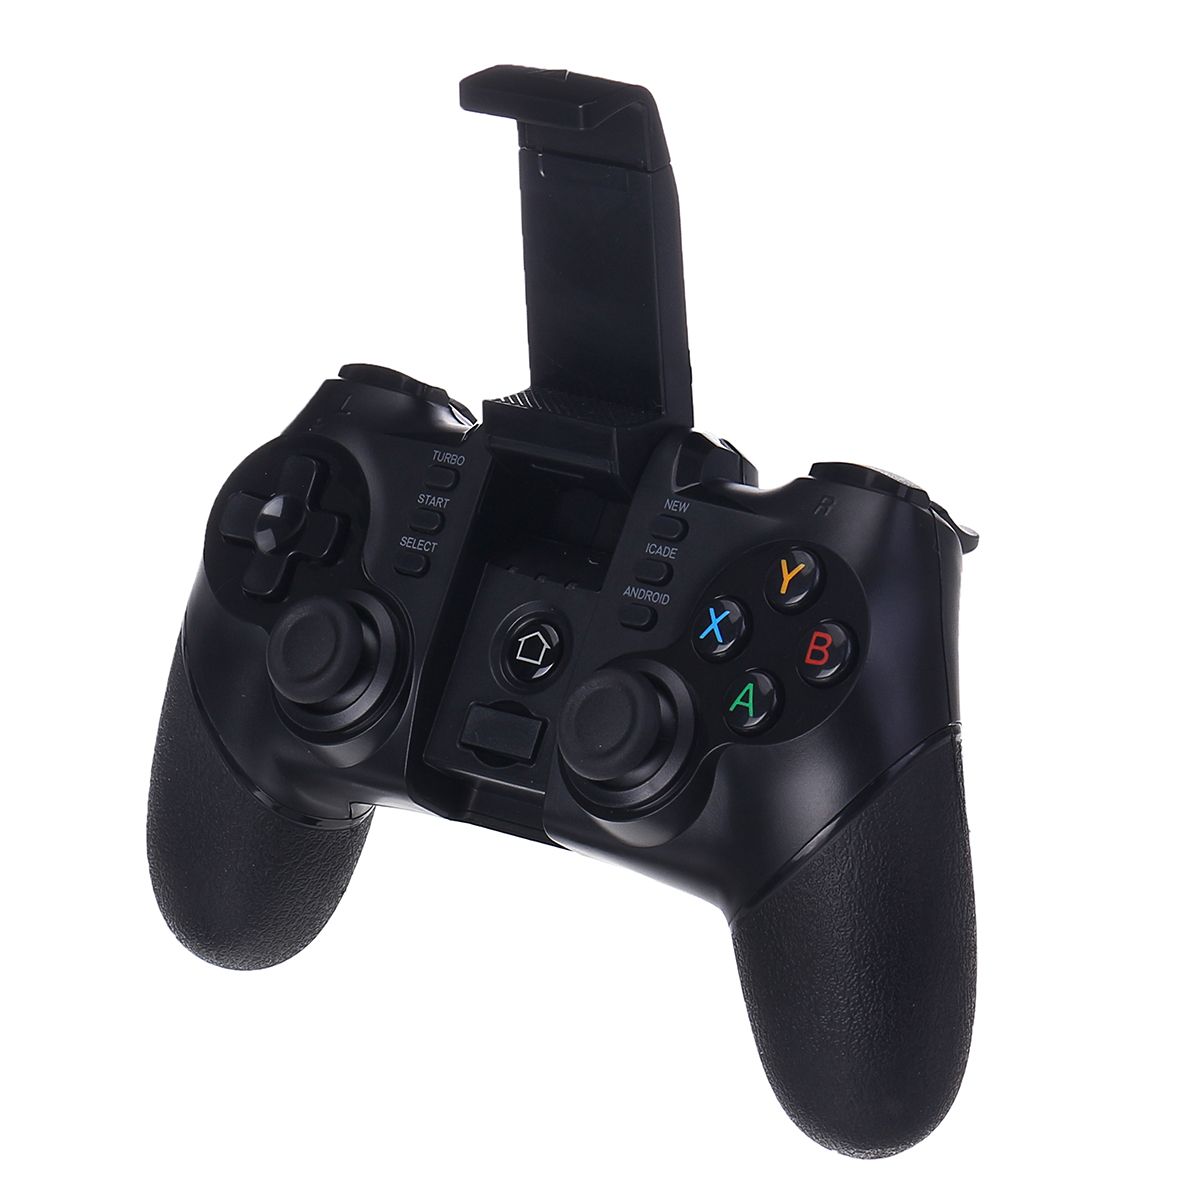 RALAN-X6-Wireless-bluetooth-Game-Controller-Gamepad-Joystick-for-IOS-Android-Mobile-Phone-Tablet-TV--1662118